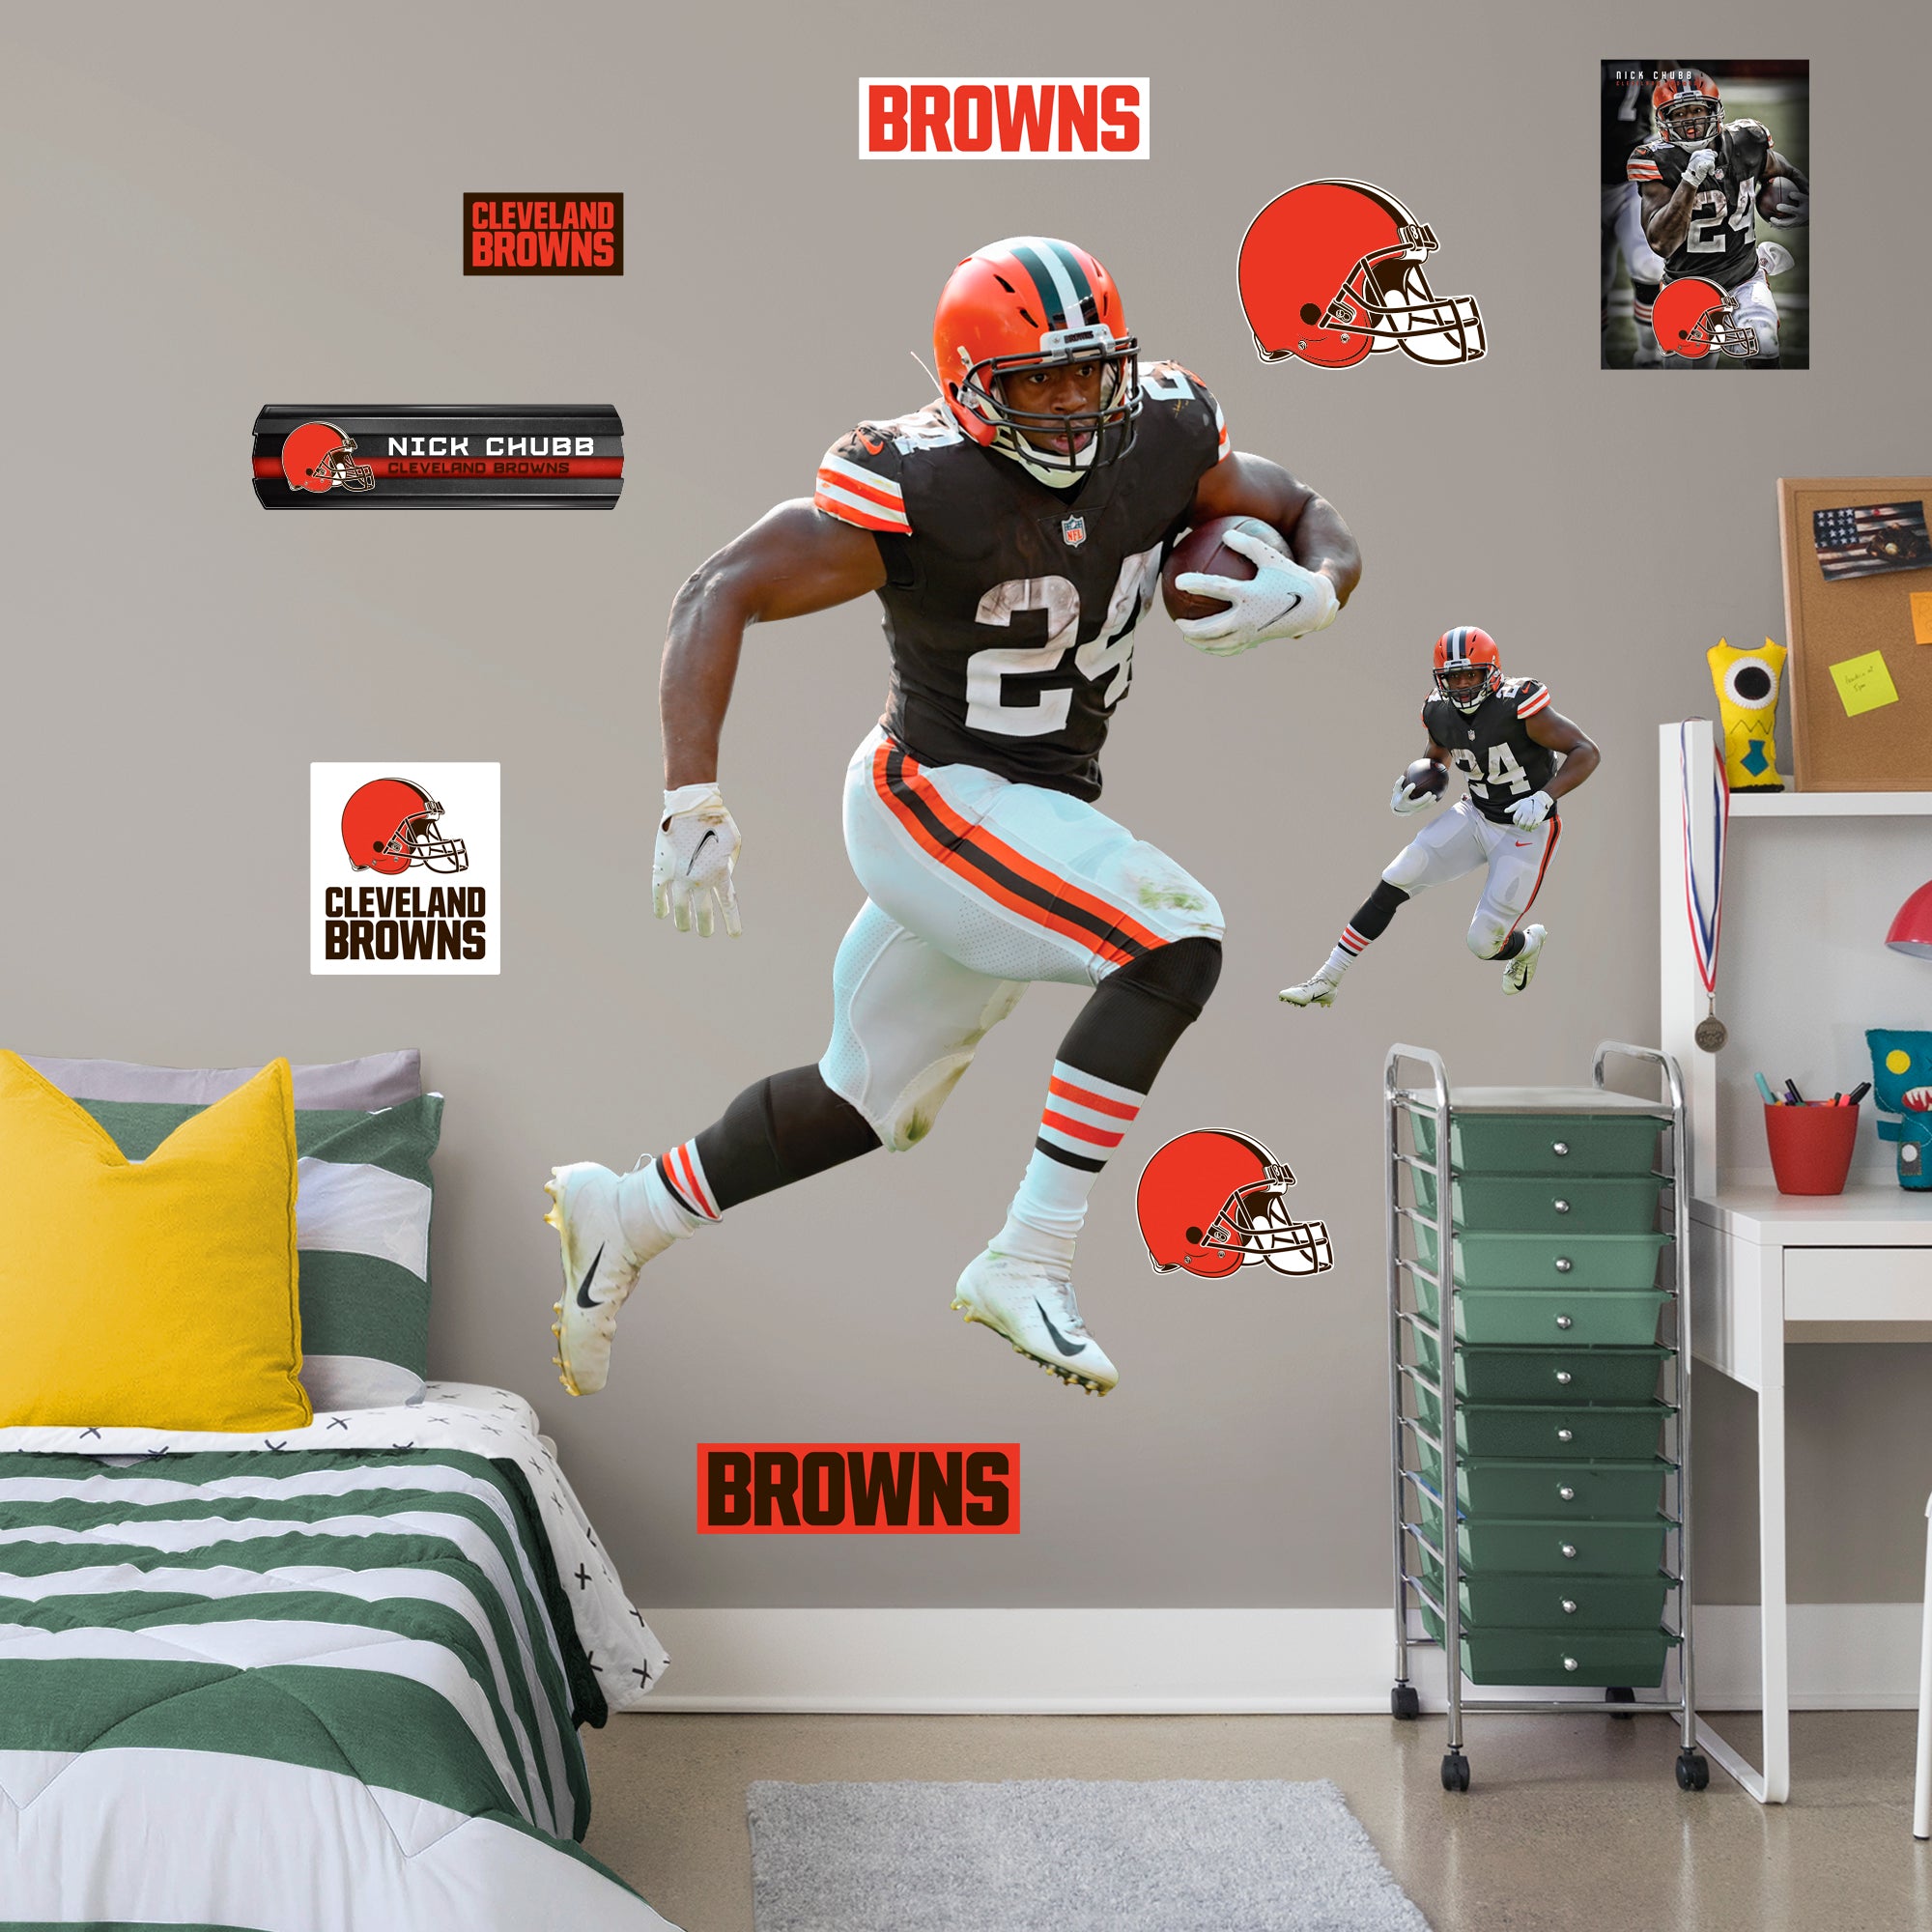 Nick Chubb 2020 - Officially Licensed NFL Removable Wall Decal Life-Size Athlete + 2 Decals (51"W x 72.5"H) by Fathead | Vinyl